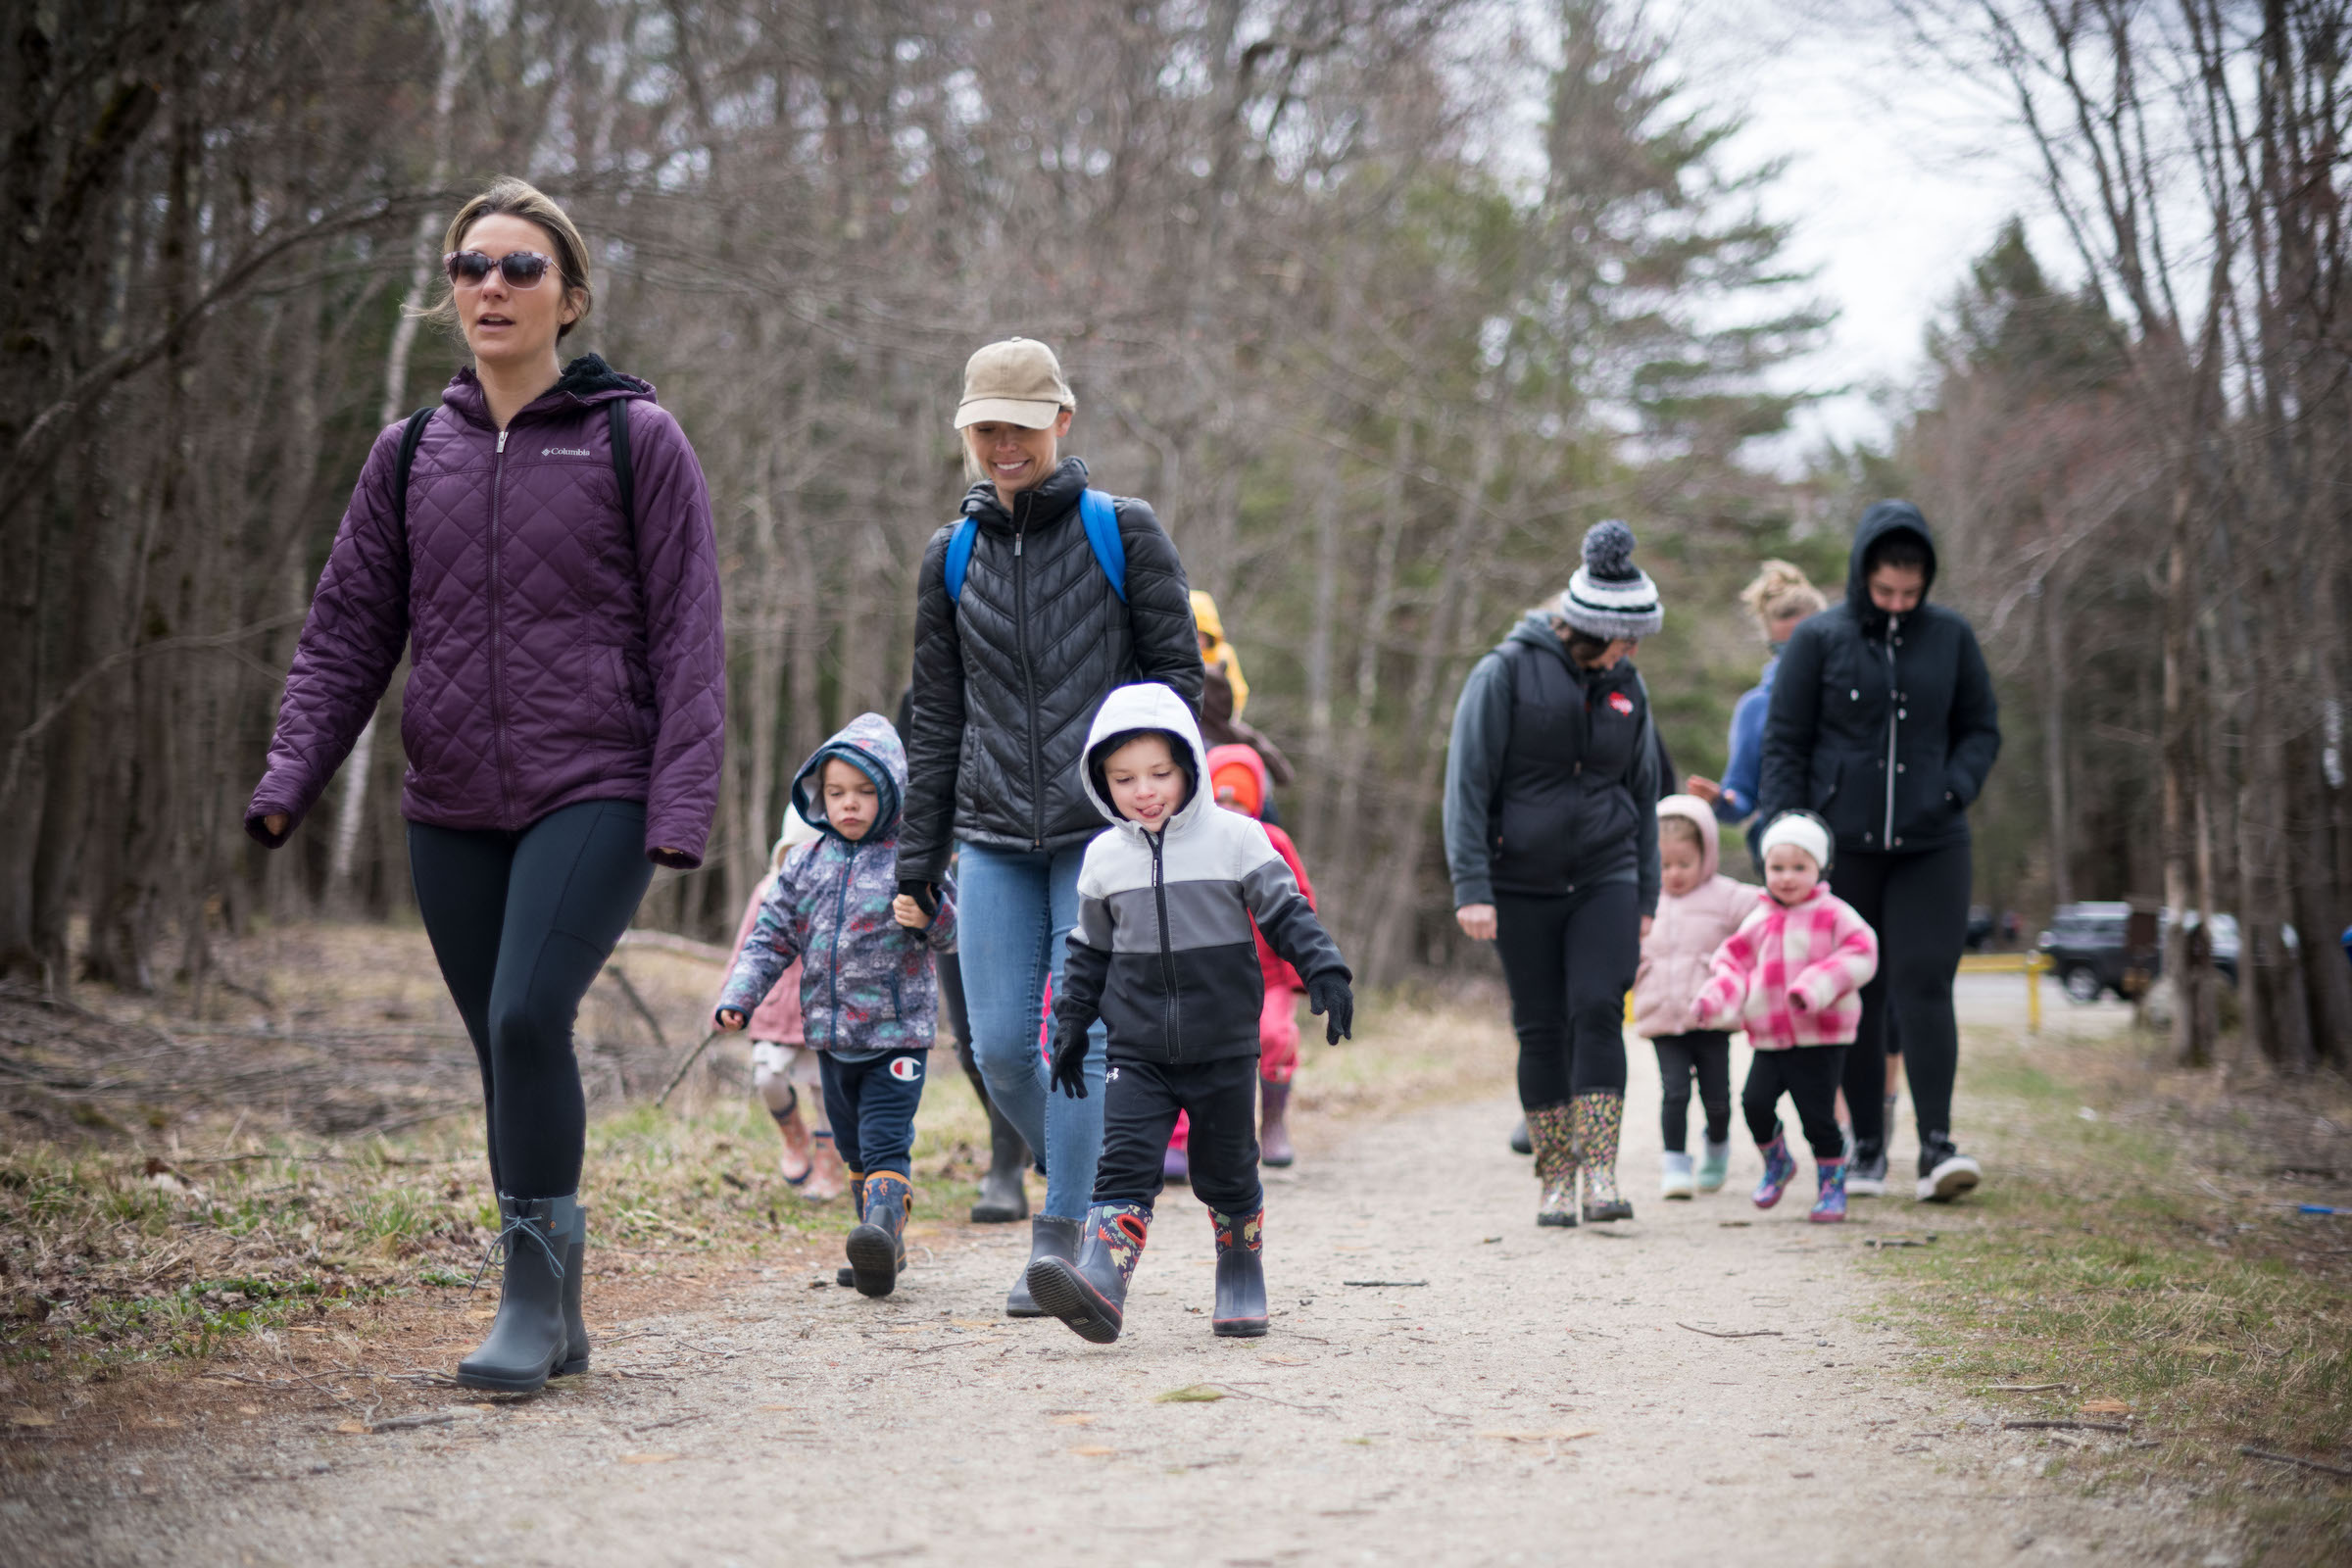 Families with young children, bundled up on a chilly day, walk down a pathway. (photo © Ben Conant)